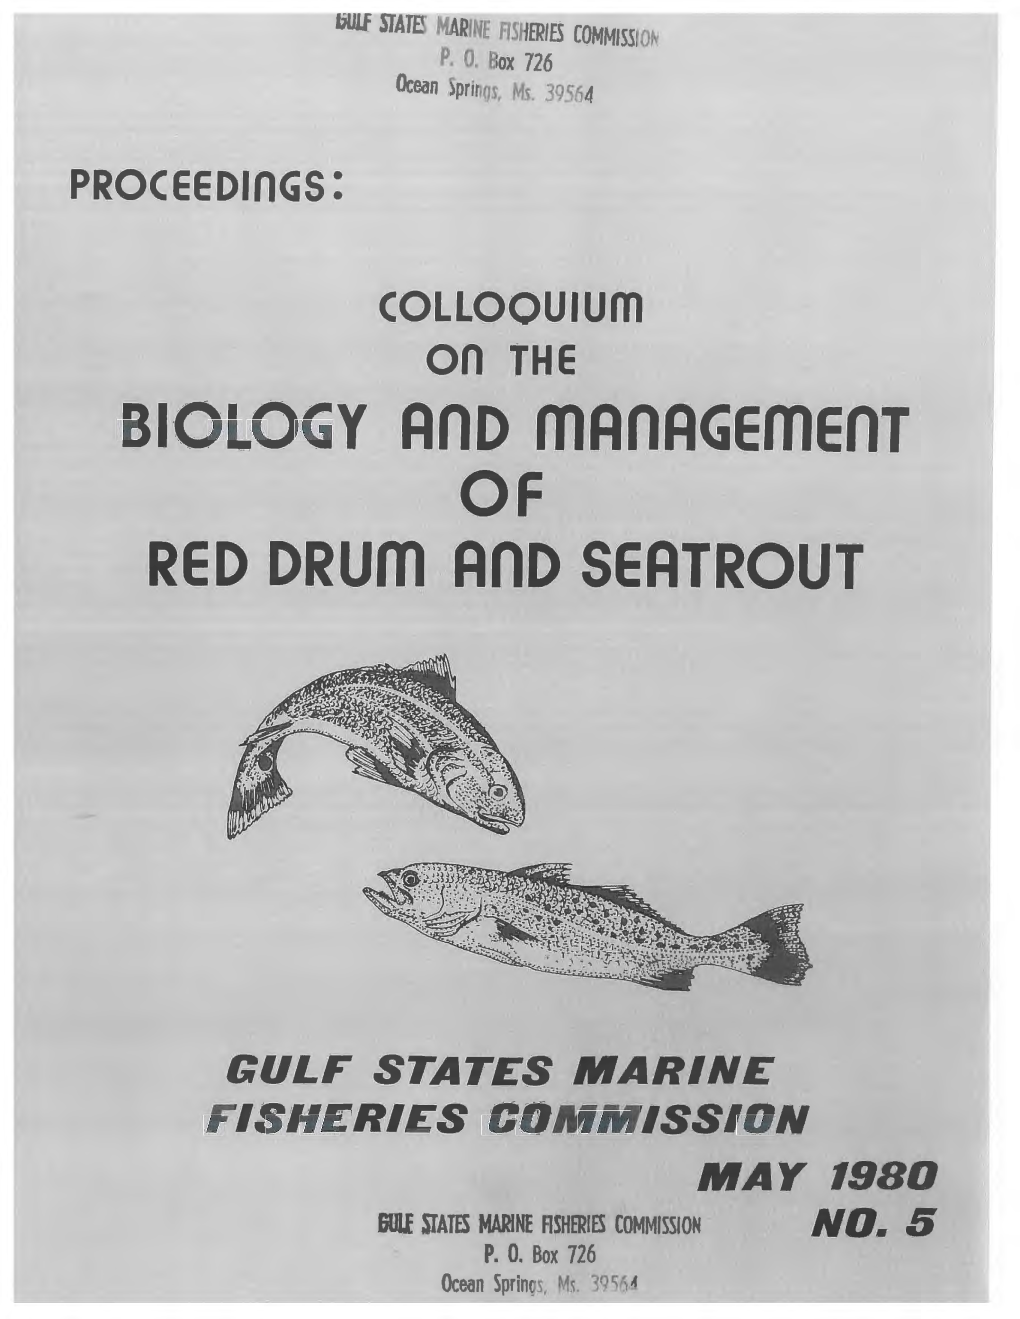 Colloquium on the Biology and Management of Red Drum And